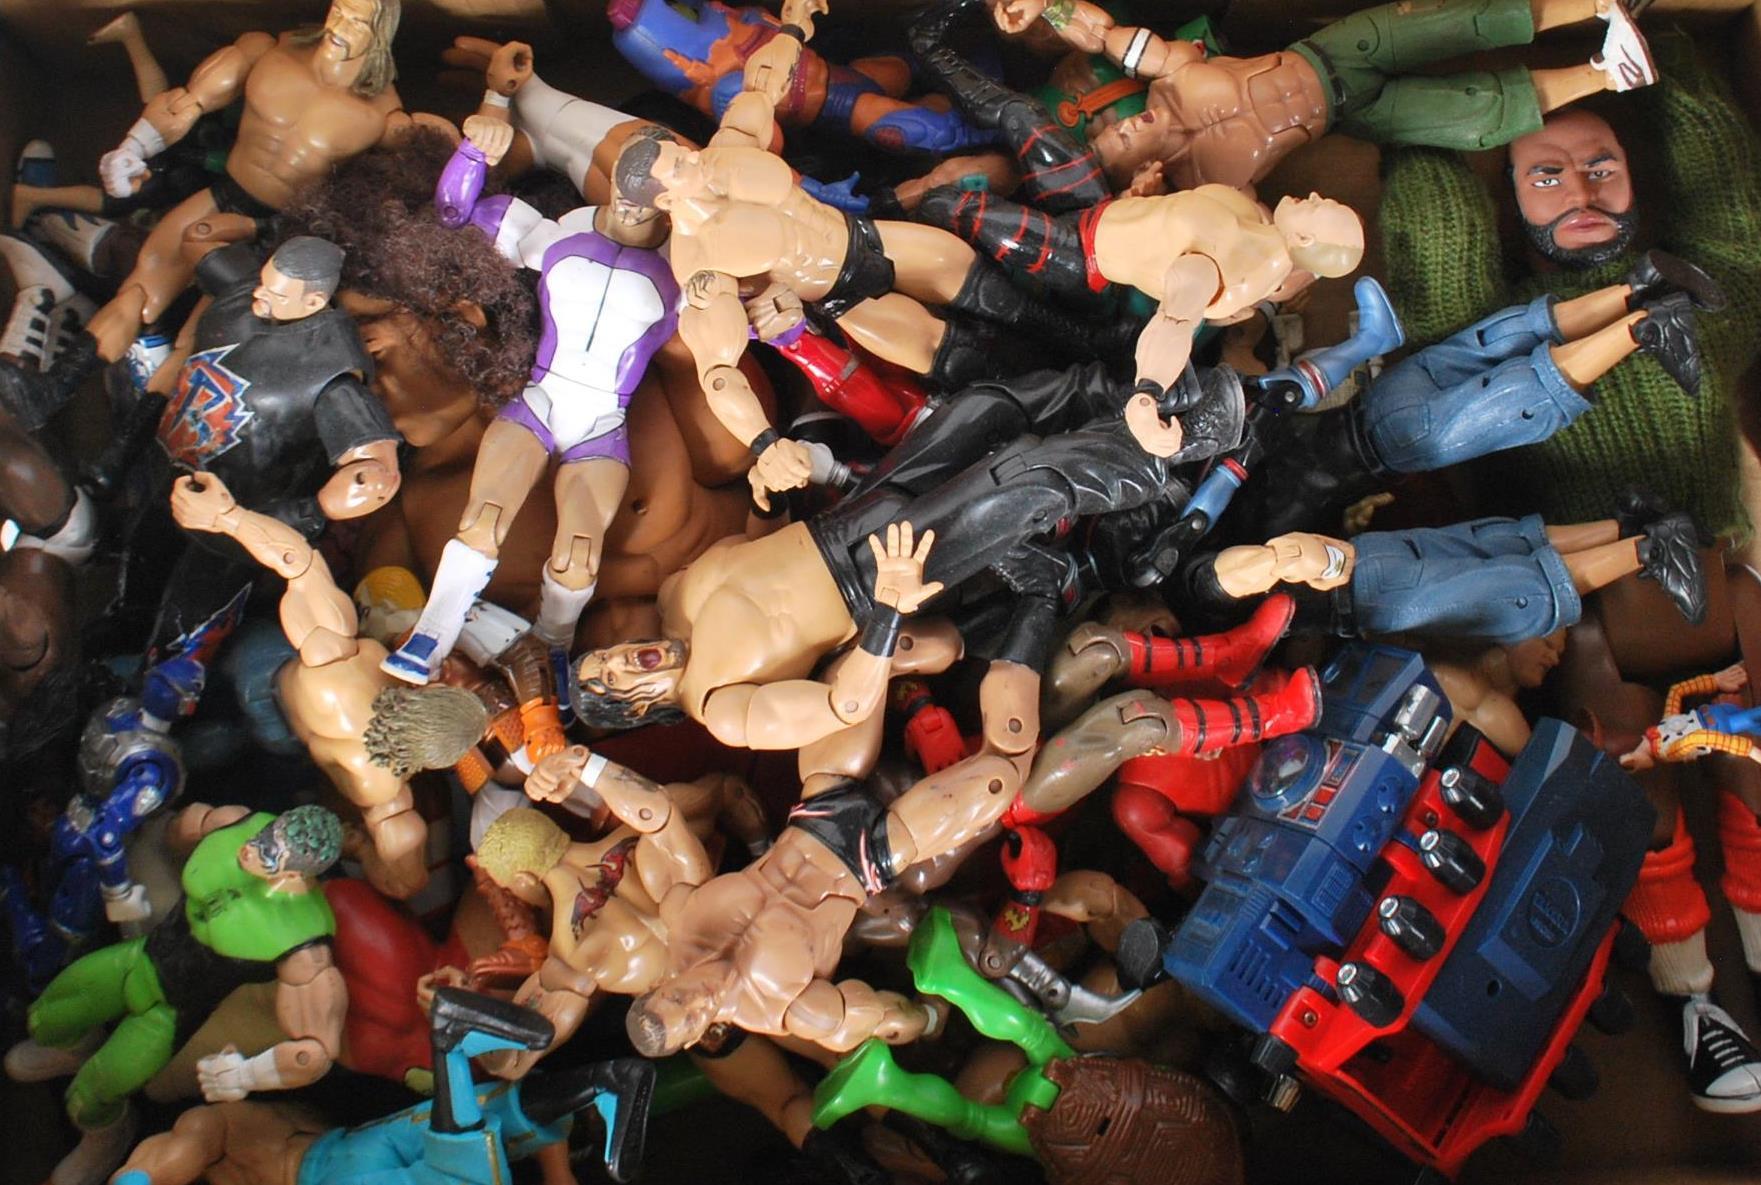 A COLLECTION OF WWE / WWF / ECW ACTION FIGURES BY JAKKS PACIFIC